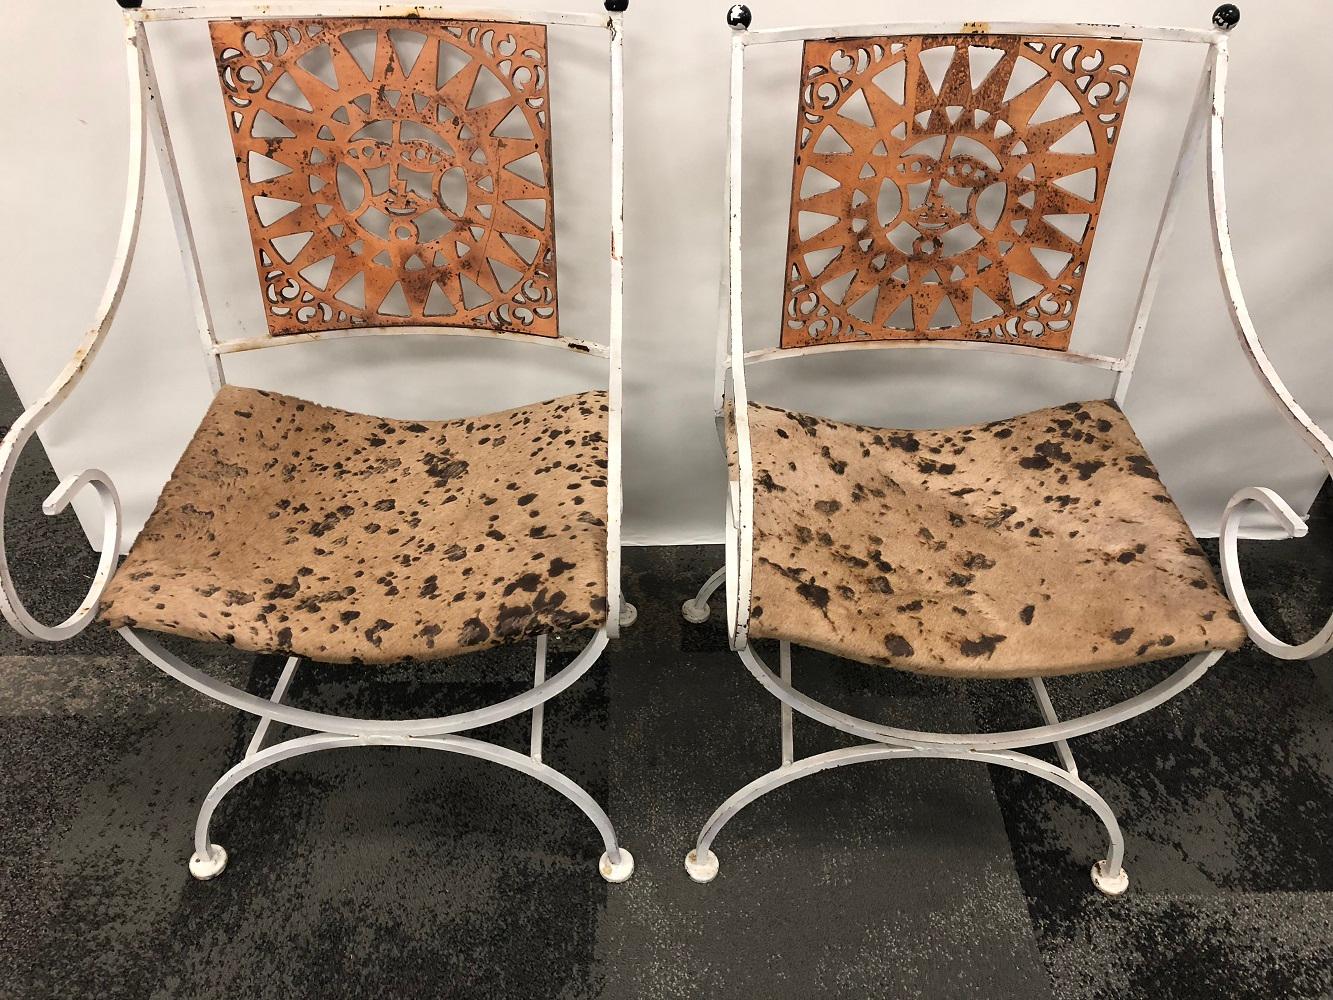 American Midcentury Sunburst Chairs by Umanoff For Sale